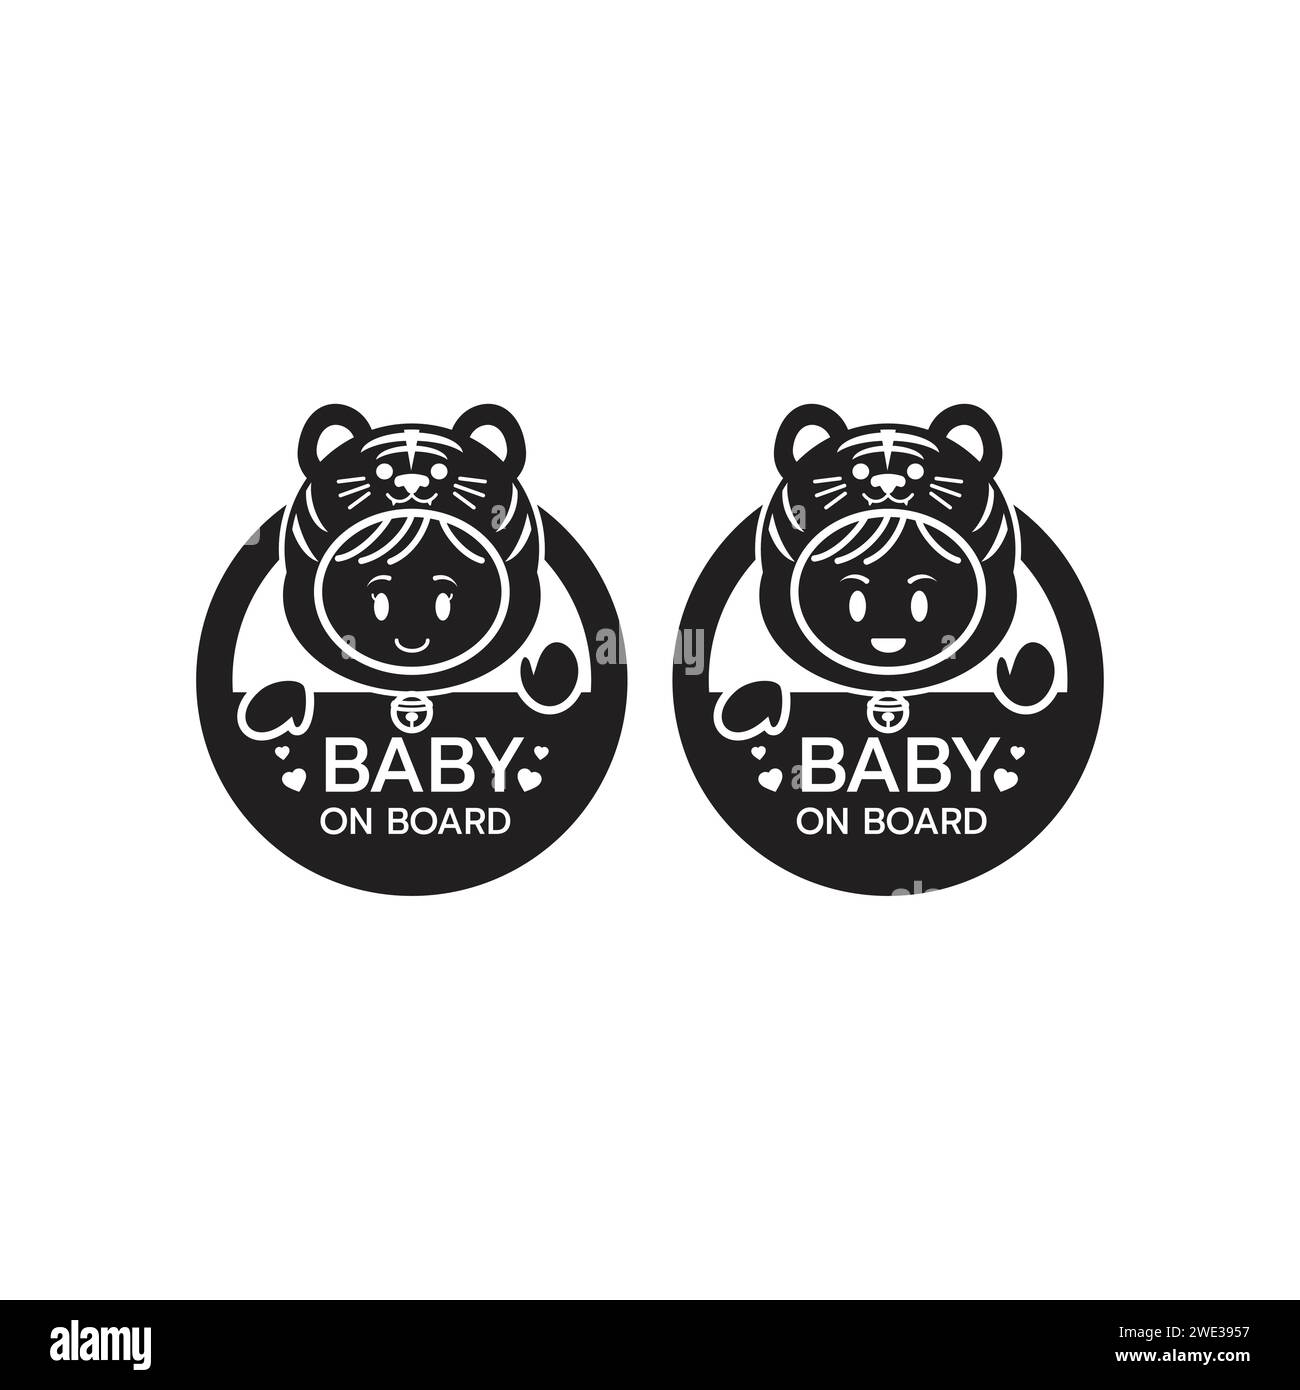 Baby on board sign logo icon isolated. Child safety sticker warning emblem. Cute Baby safety design illustration,Funny small smiling boy and girl wear Stock Vector